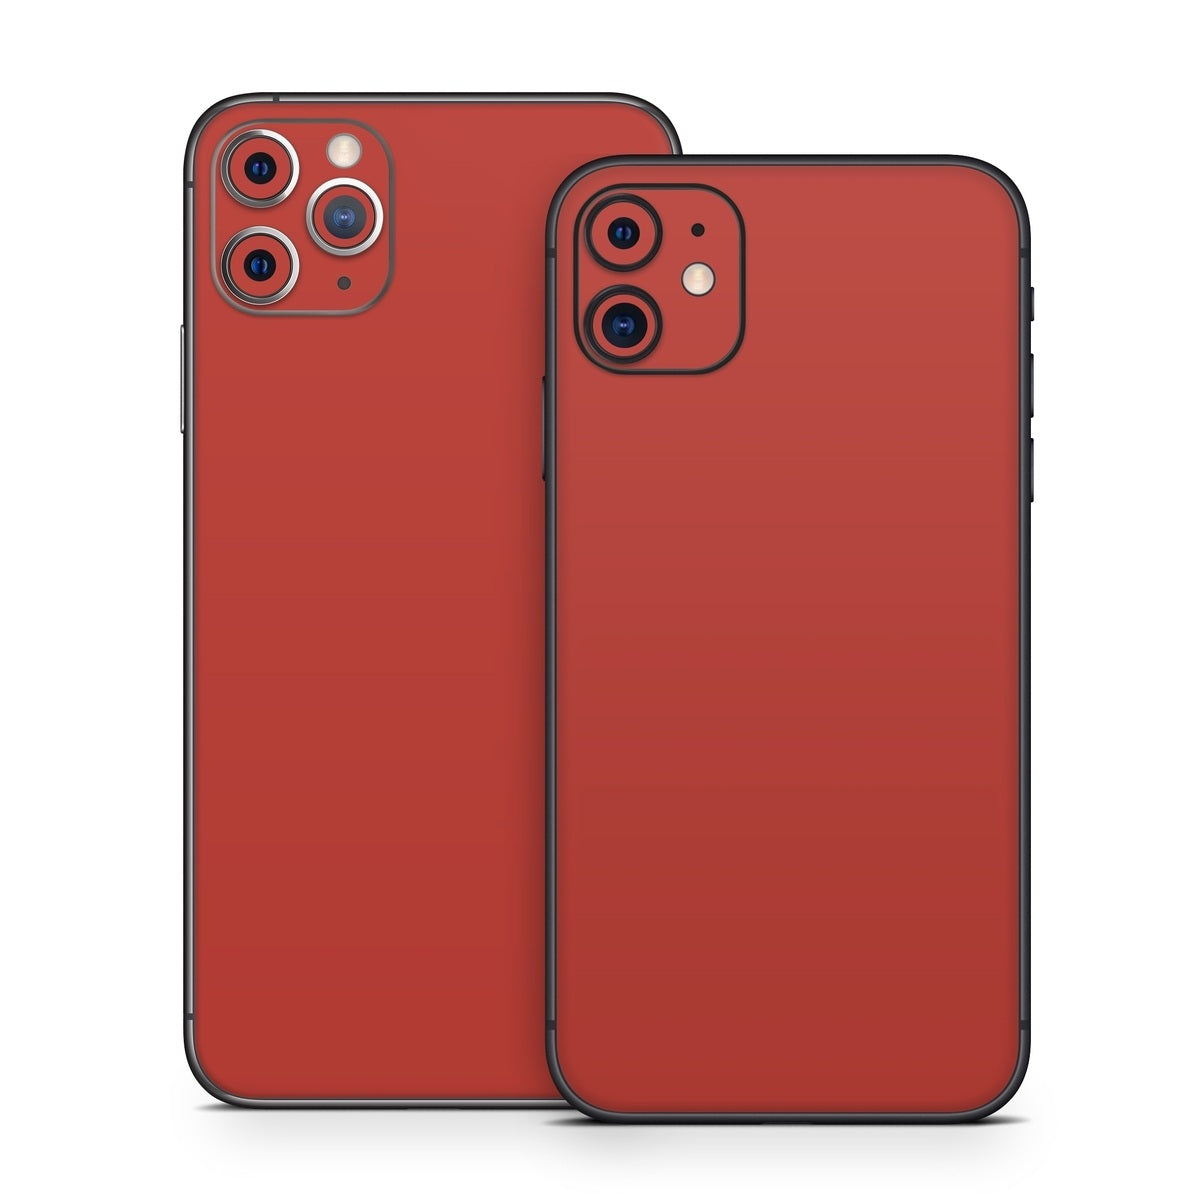 Solid State Berry - Apple iPhone 11 Skin